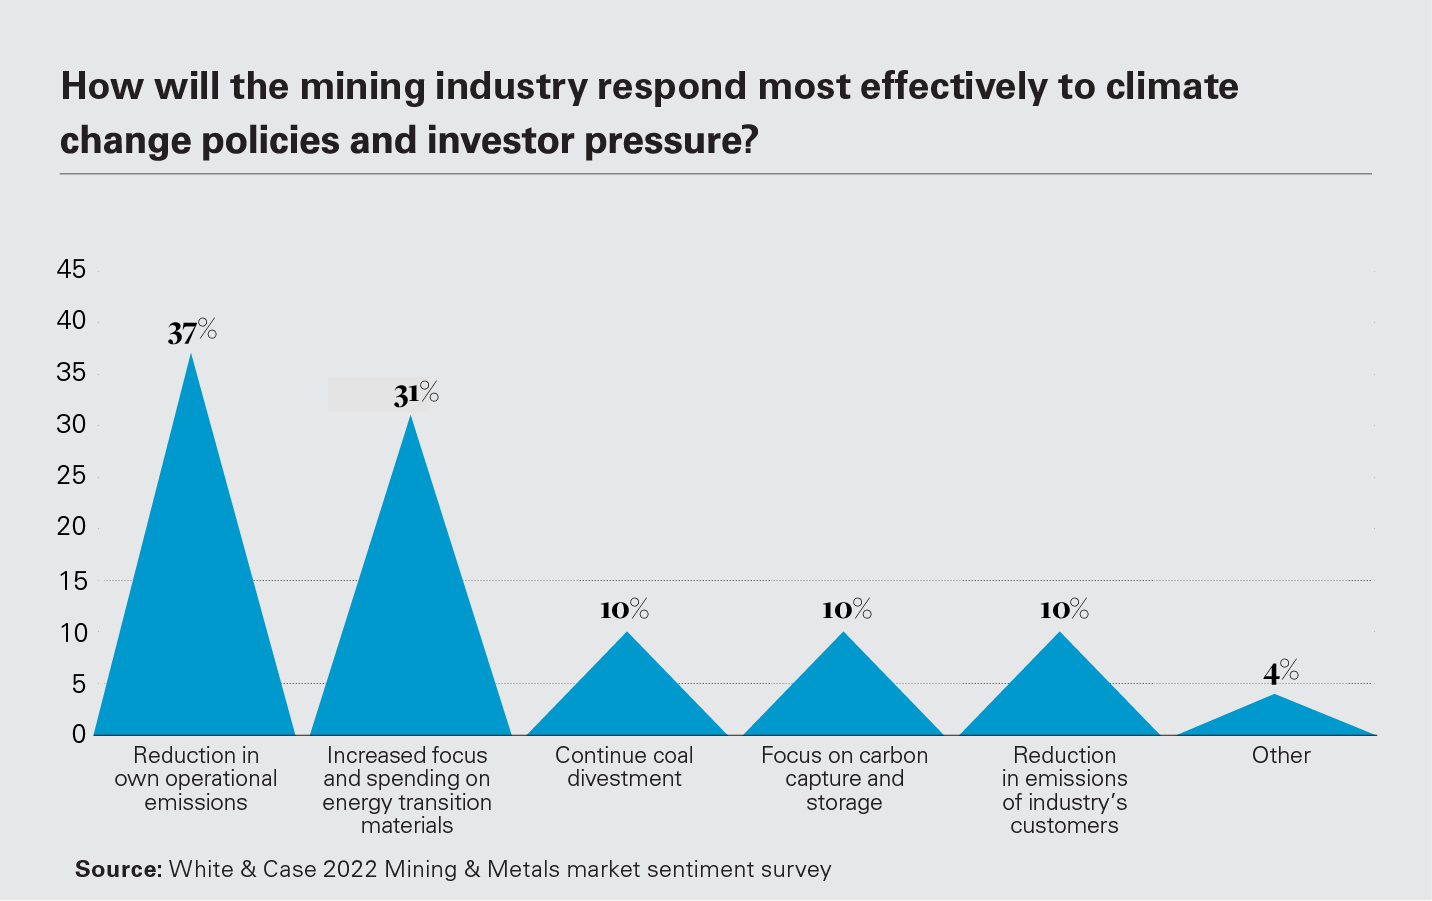 How will the mining industry respond most effectively to climate change policies and investor pressure?